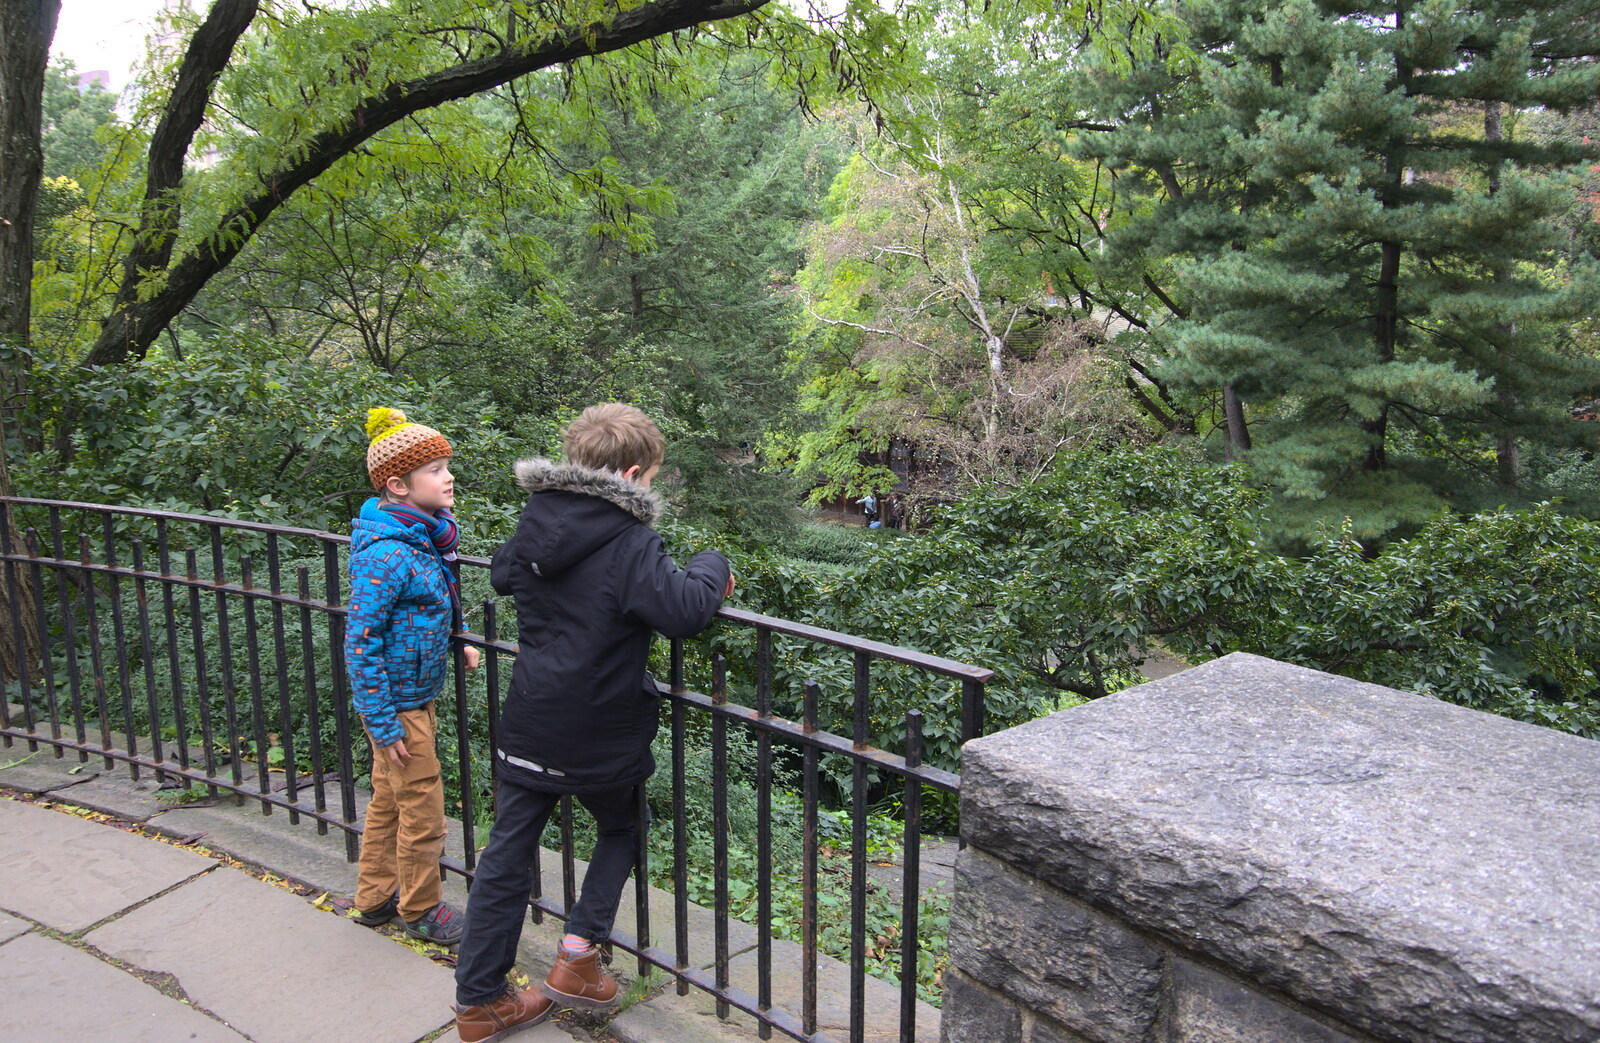 Harry and Fred look out over Central Park from Open-top Buses and a Day at the Museum, New York, United States - 22nd October 2018